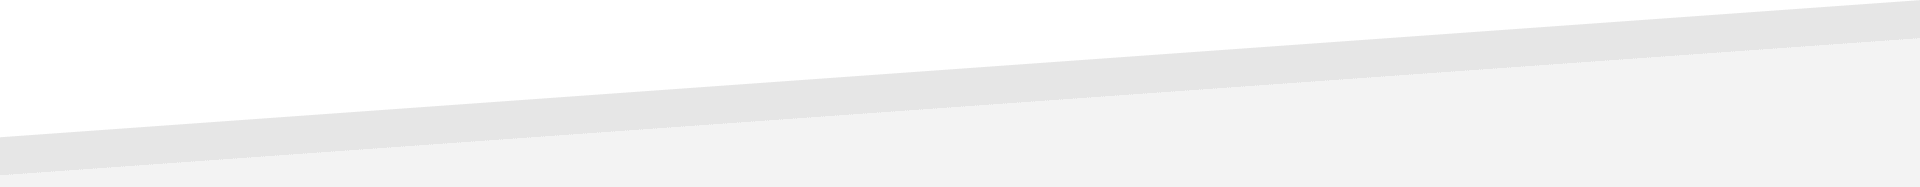 A green and white background with a white border.